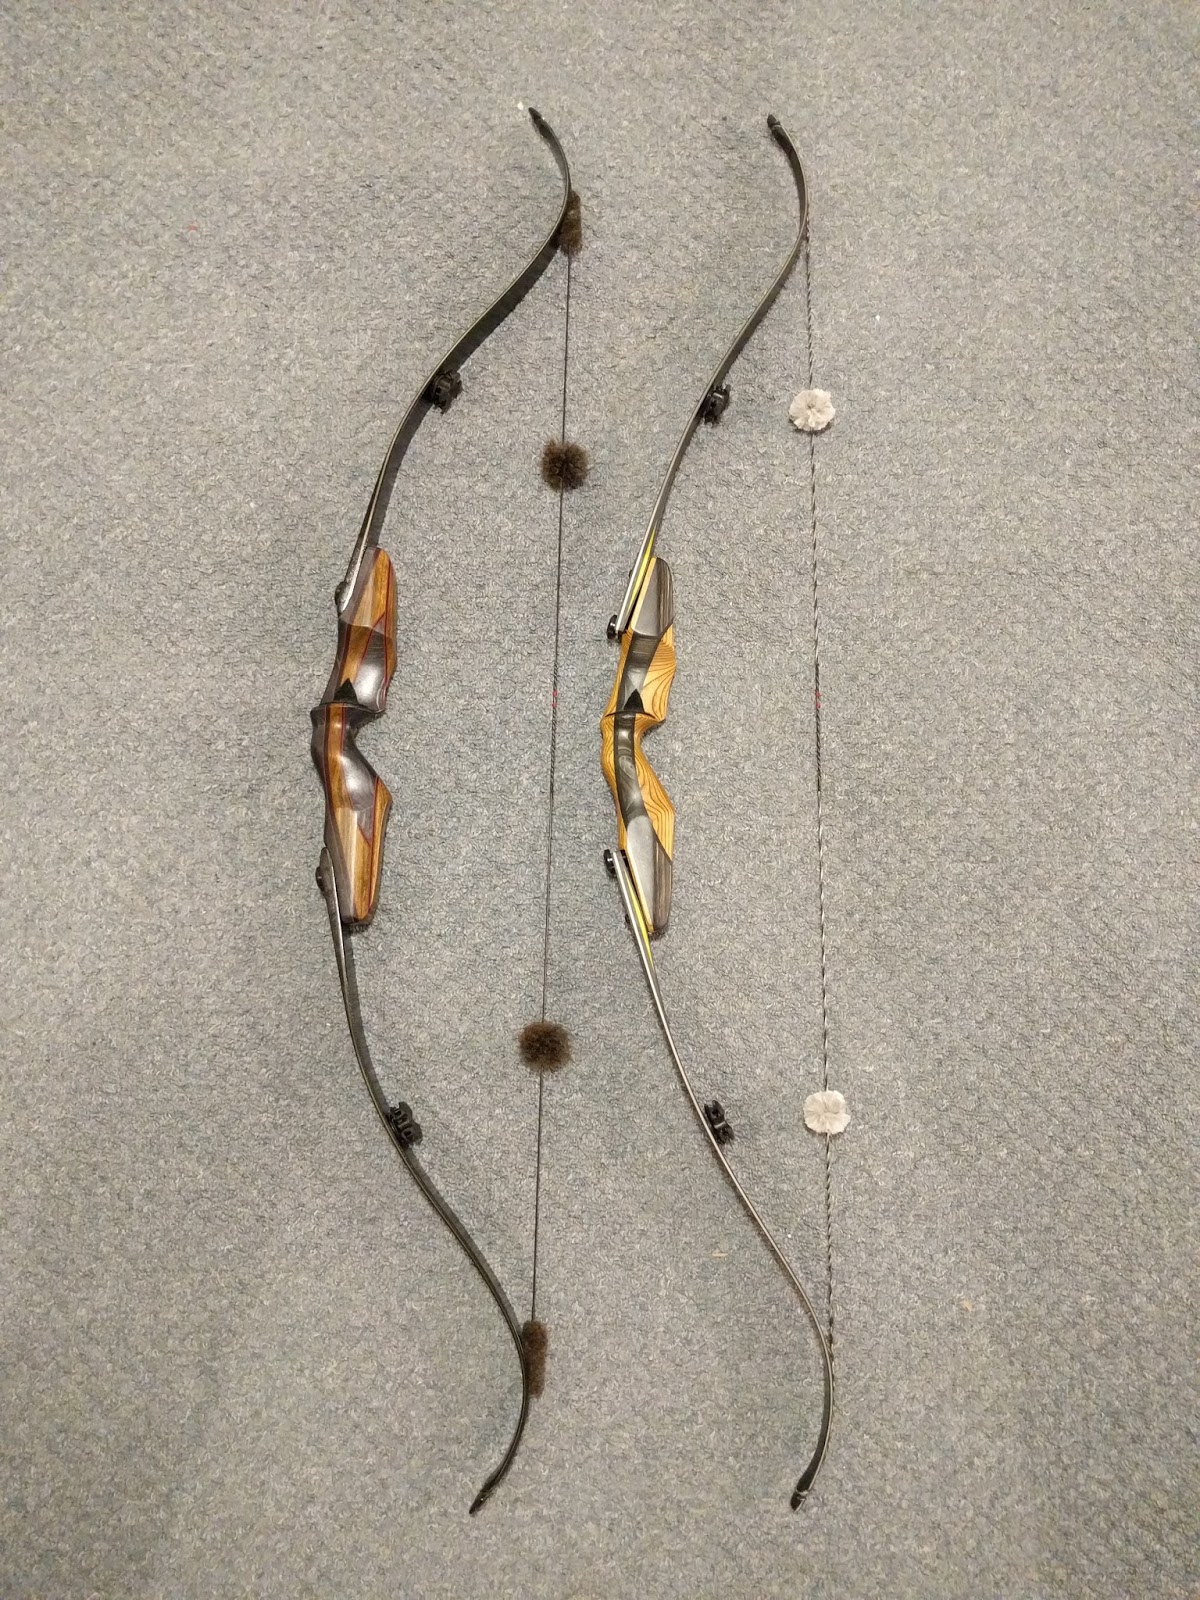 The Amateur Archer - and related gear